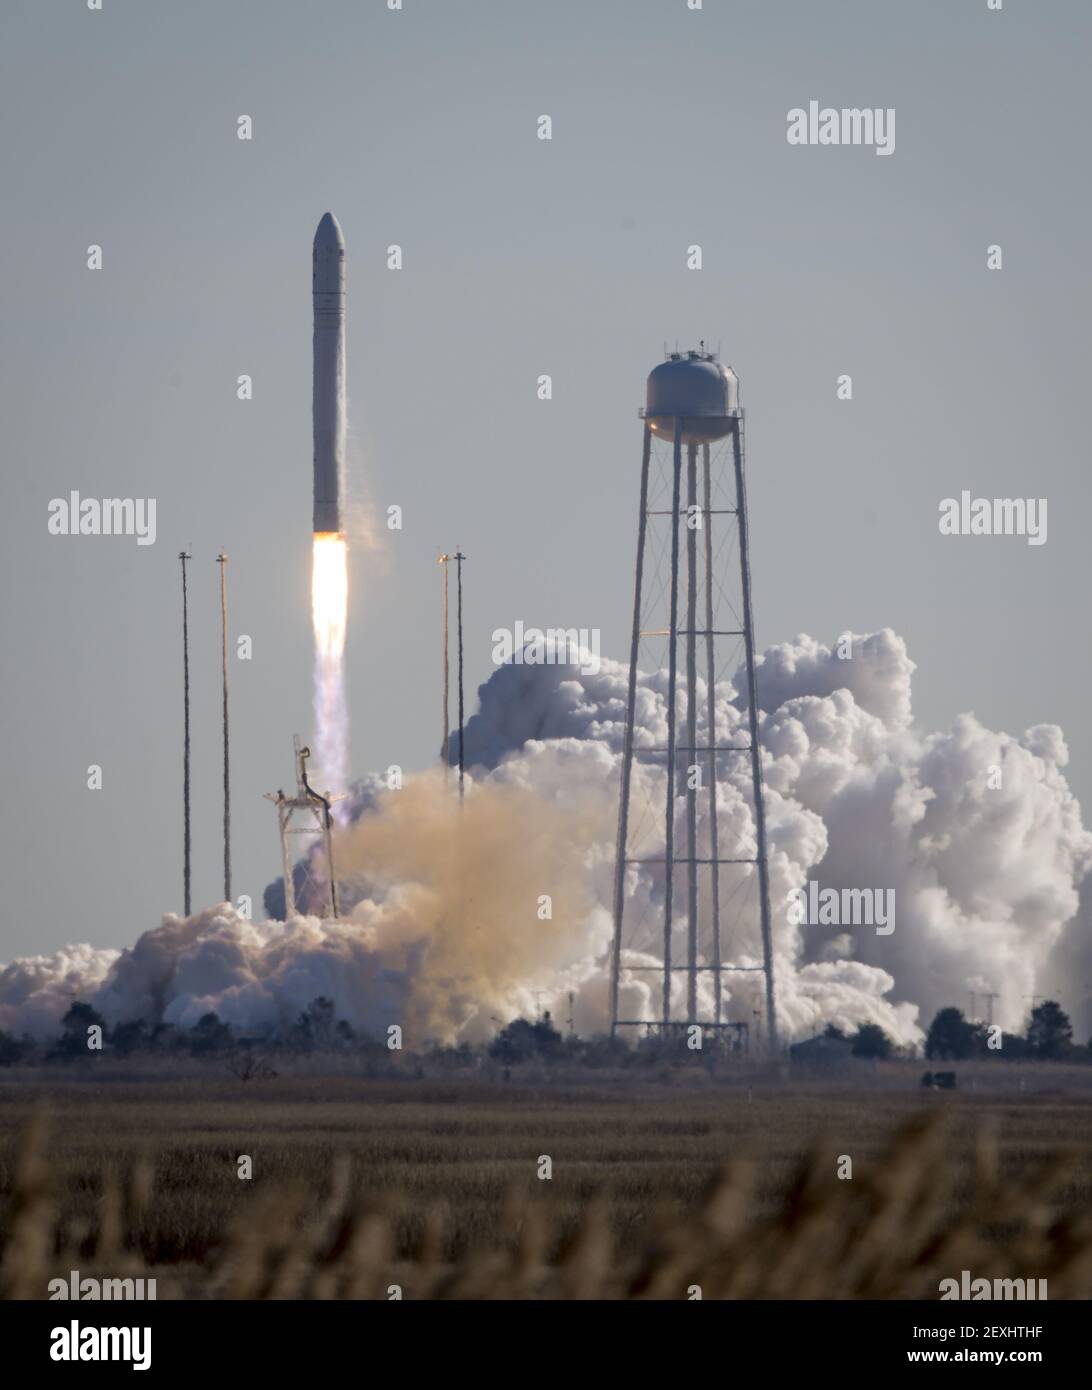 An Orbital Sciences Corporation Antares rocket is seen as it launches from Pad-0A at NASA's Wallops Flight Facility, Thursday, Jan. 9, 2014, Wallops Island, VA. Antares is carrying the Cygnus spacecraft on a cargo resupply mission to the International Space Station. The Orbital-1 mission is Orbital Sciences' first contracted cargo delivery flight to the space station for NASA. Cygnus is carrying science experiments, crew provisions, spare parts and other hardware to the space station. Image Credit: Bill Ingalls/NASA/Sipa USA Stock Photo